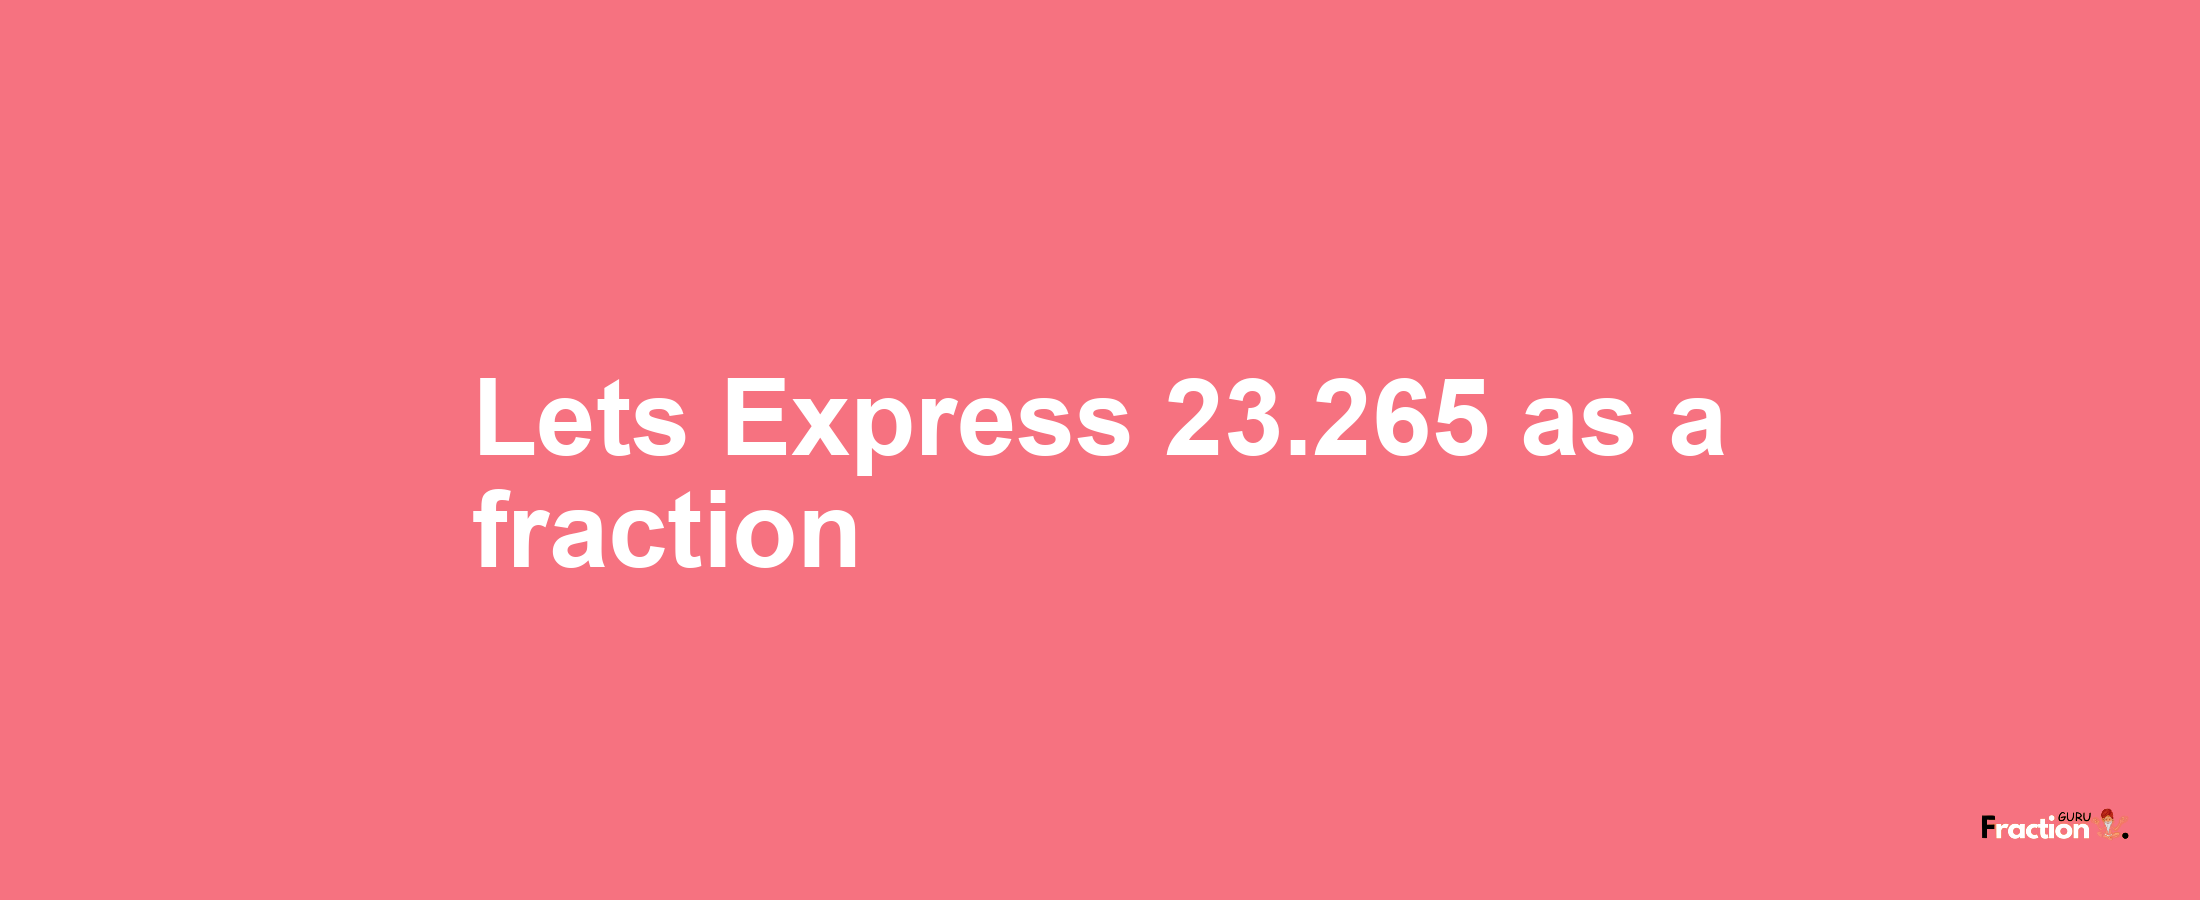 Lets Express 23.265 as afraction